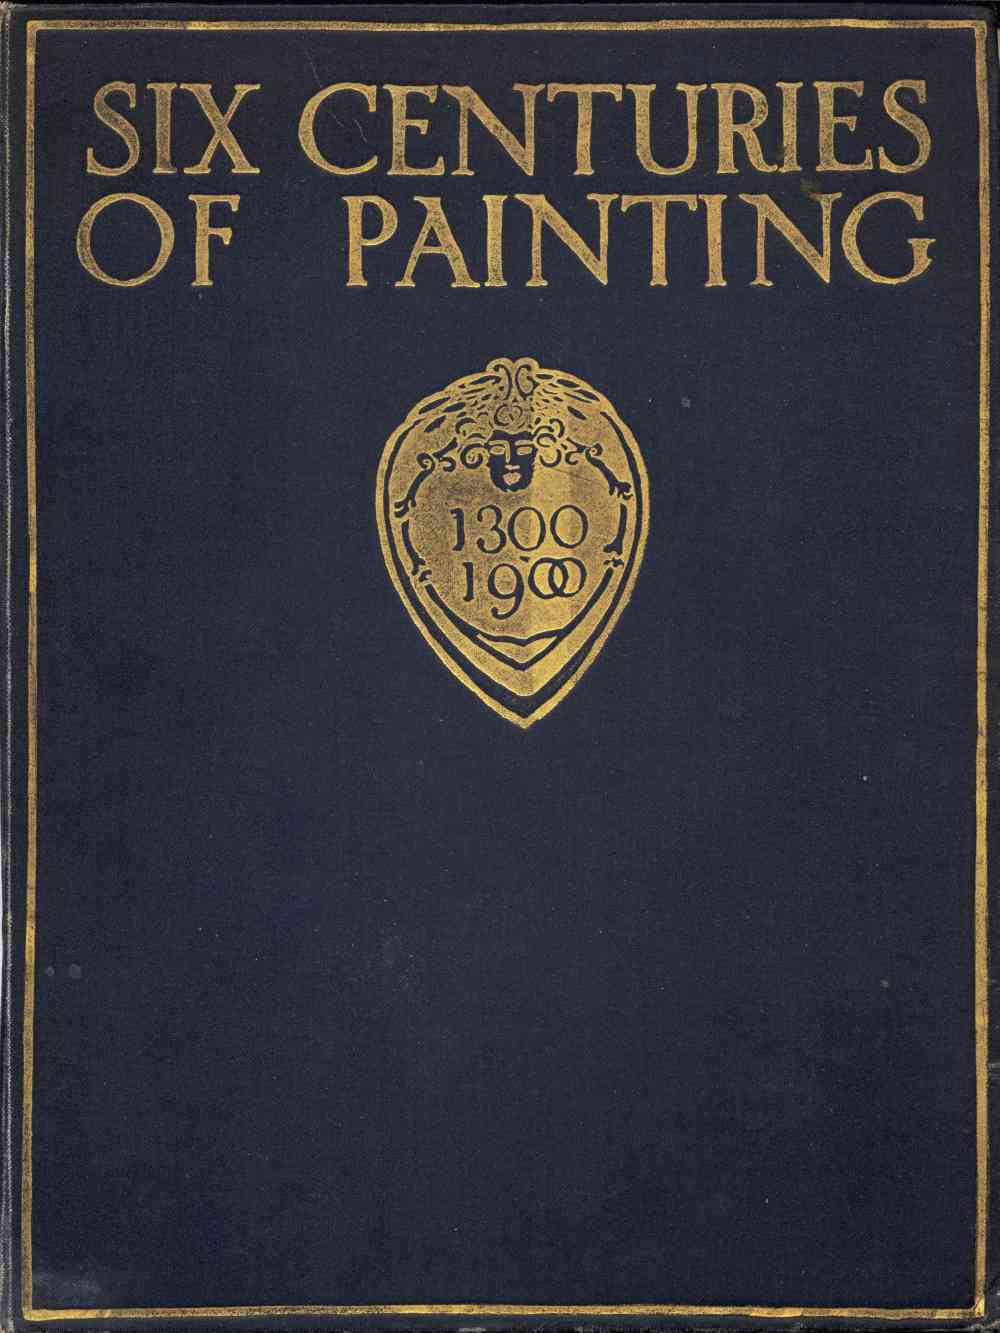 The Project Gutenberg eBook of Six Centuries Of Painting, by